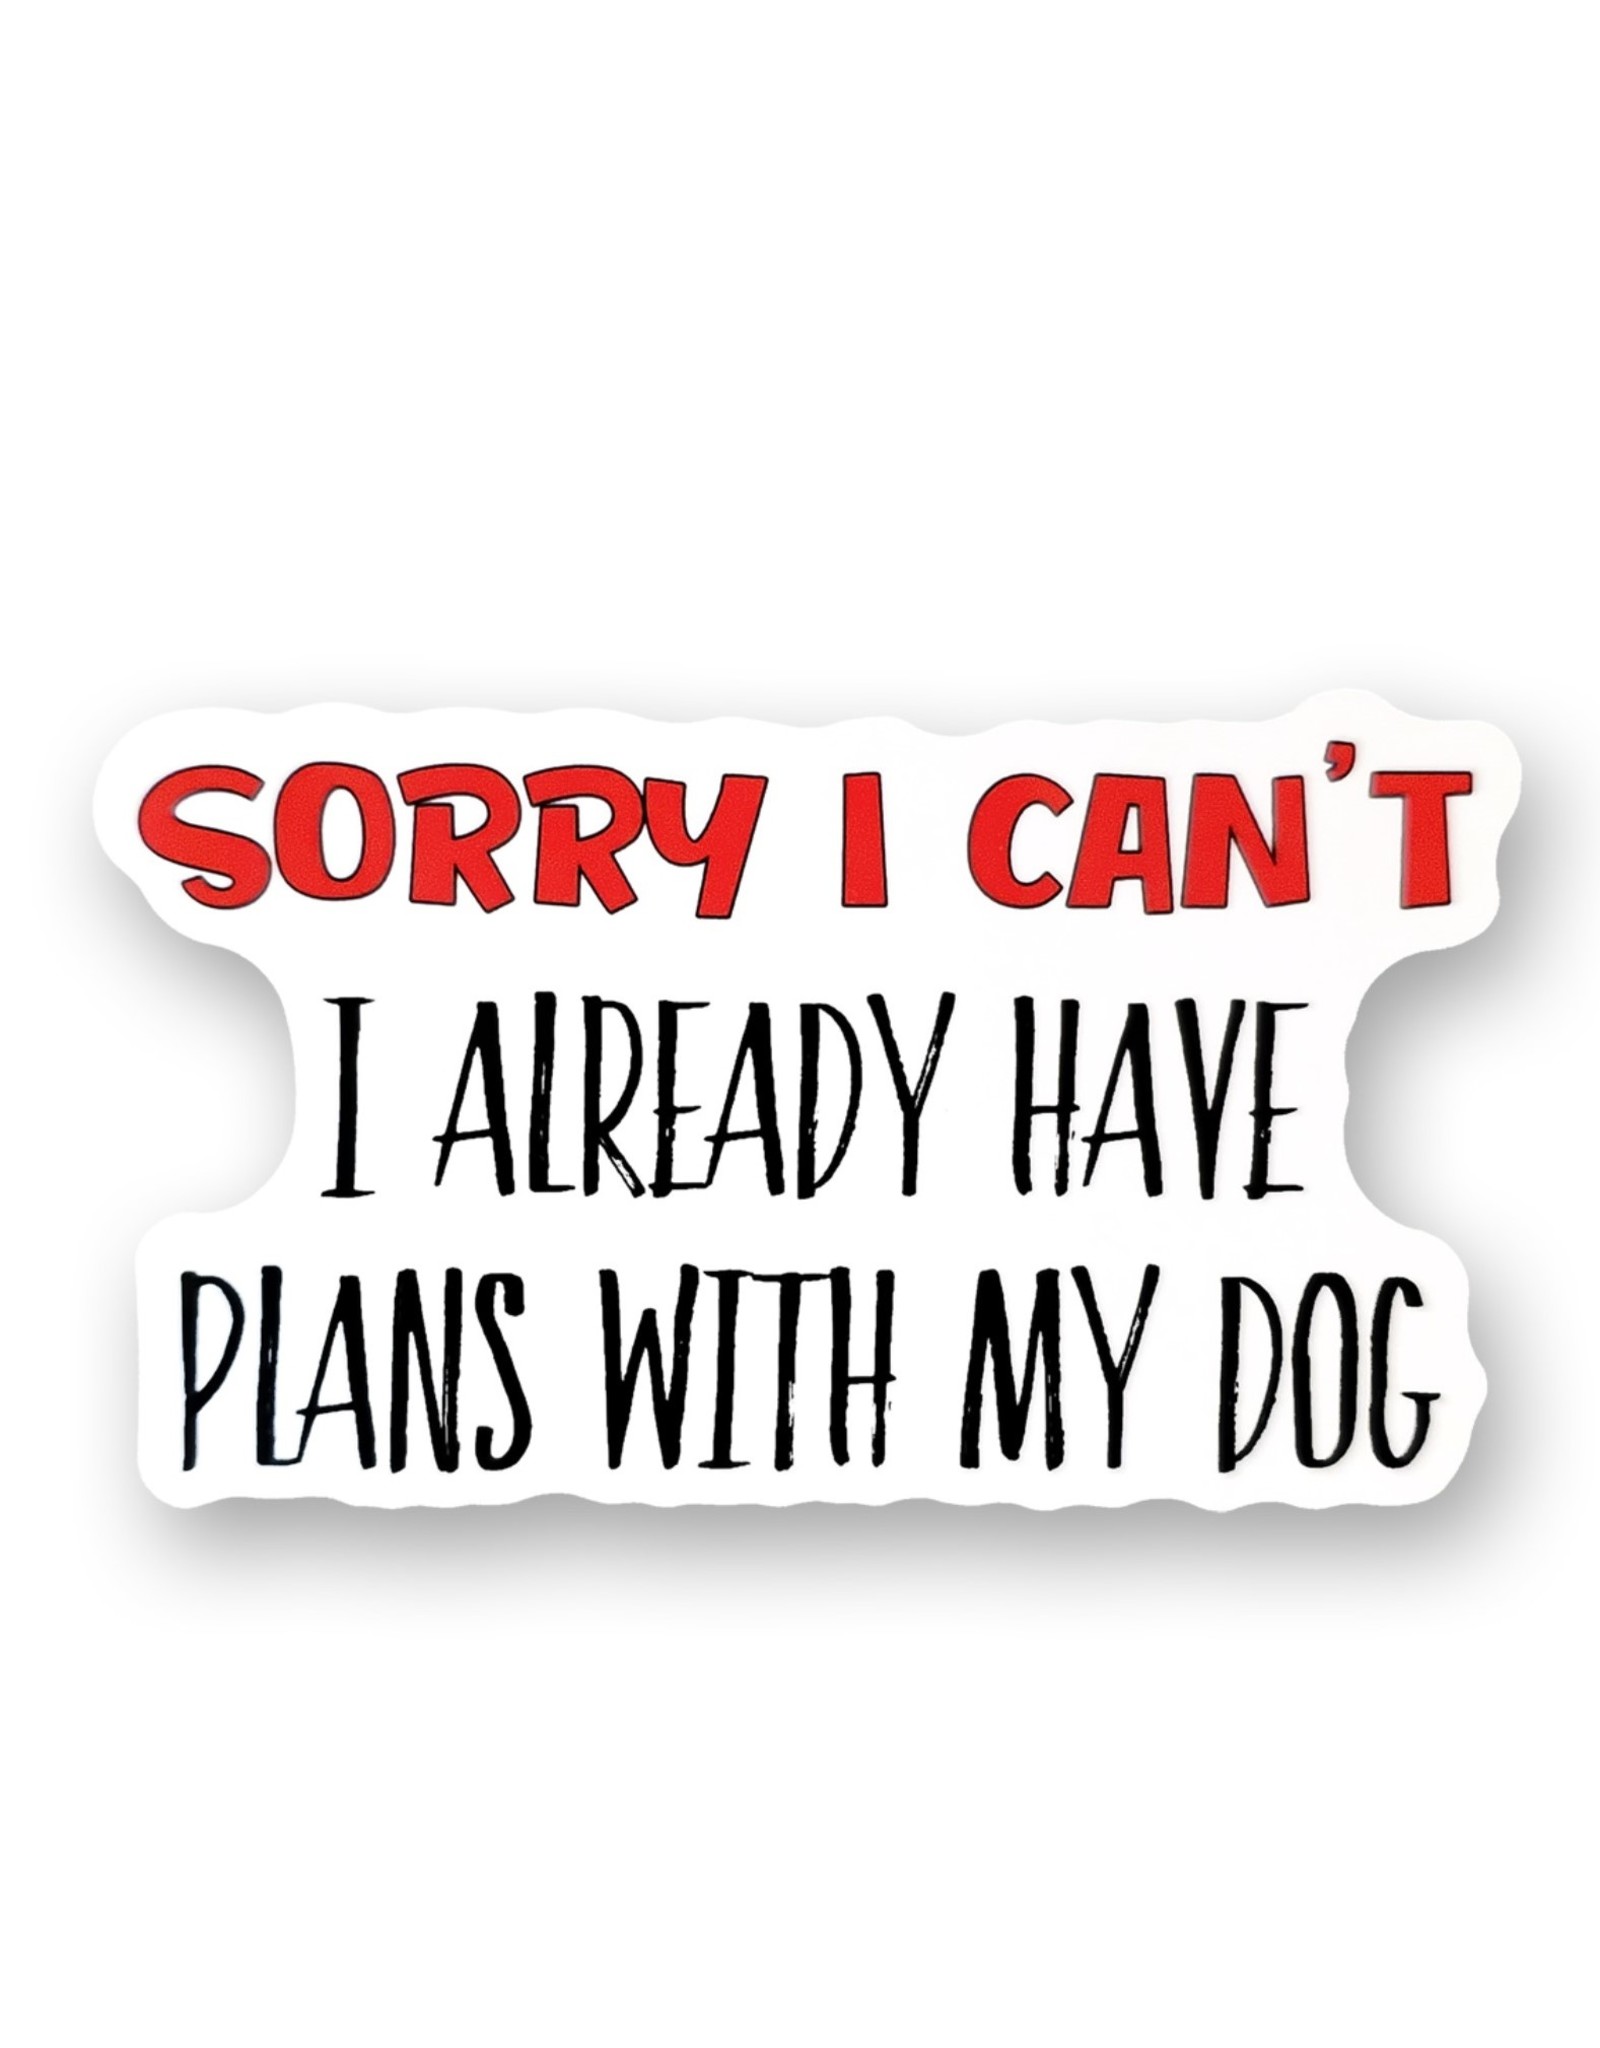 Sorry I can't Dog Sticker